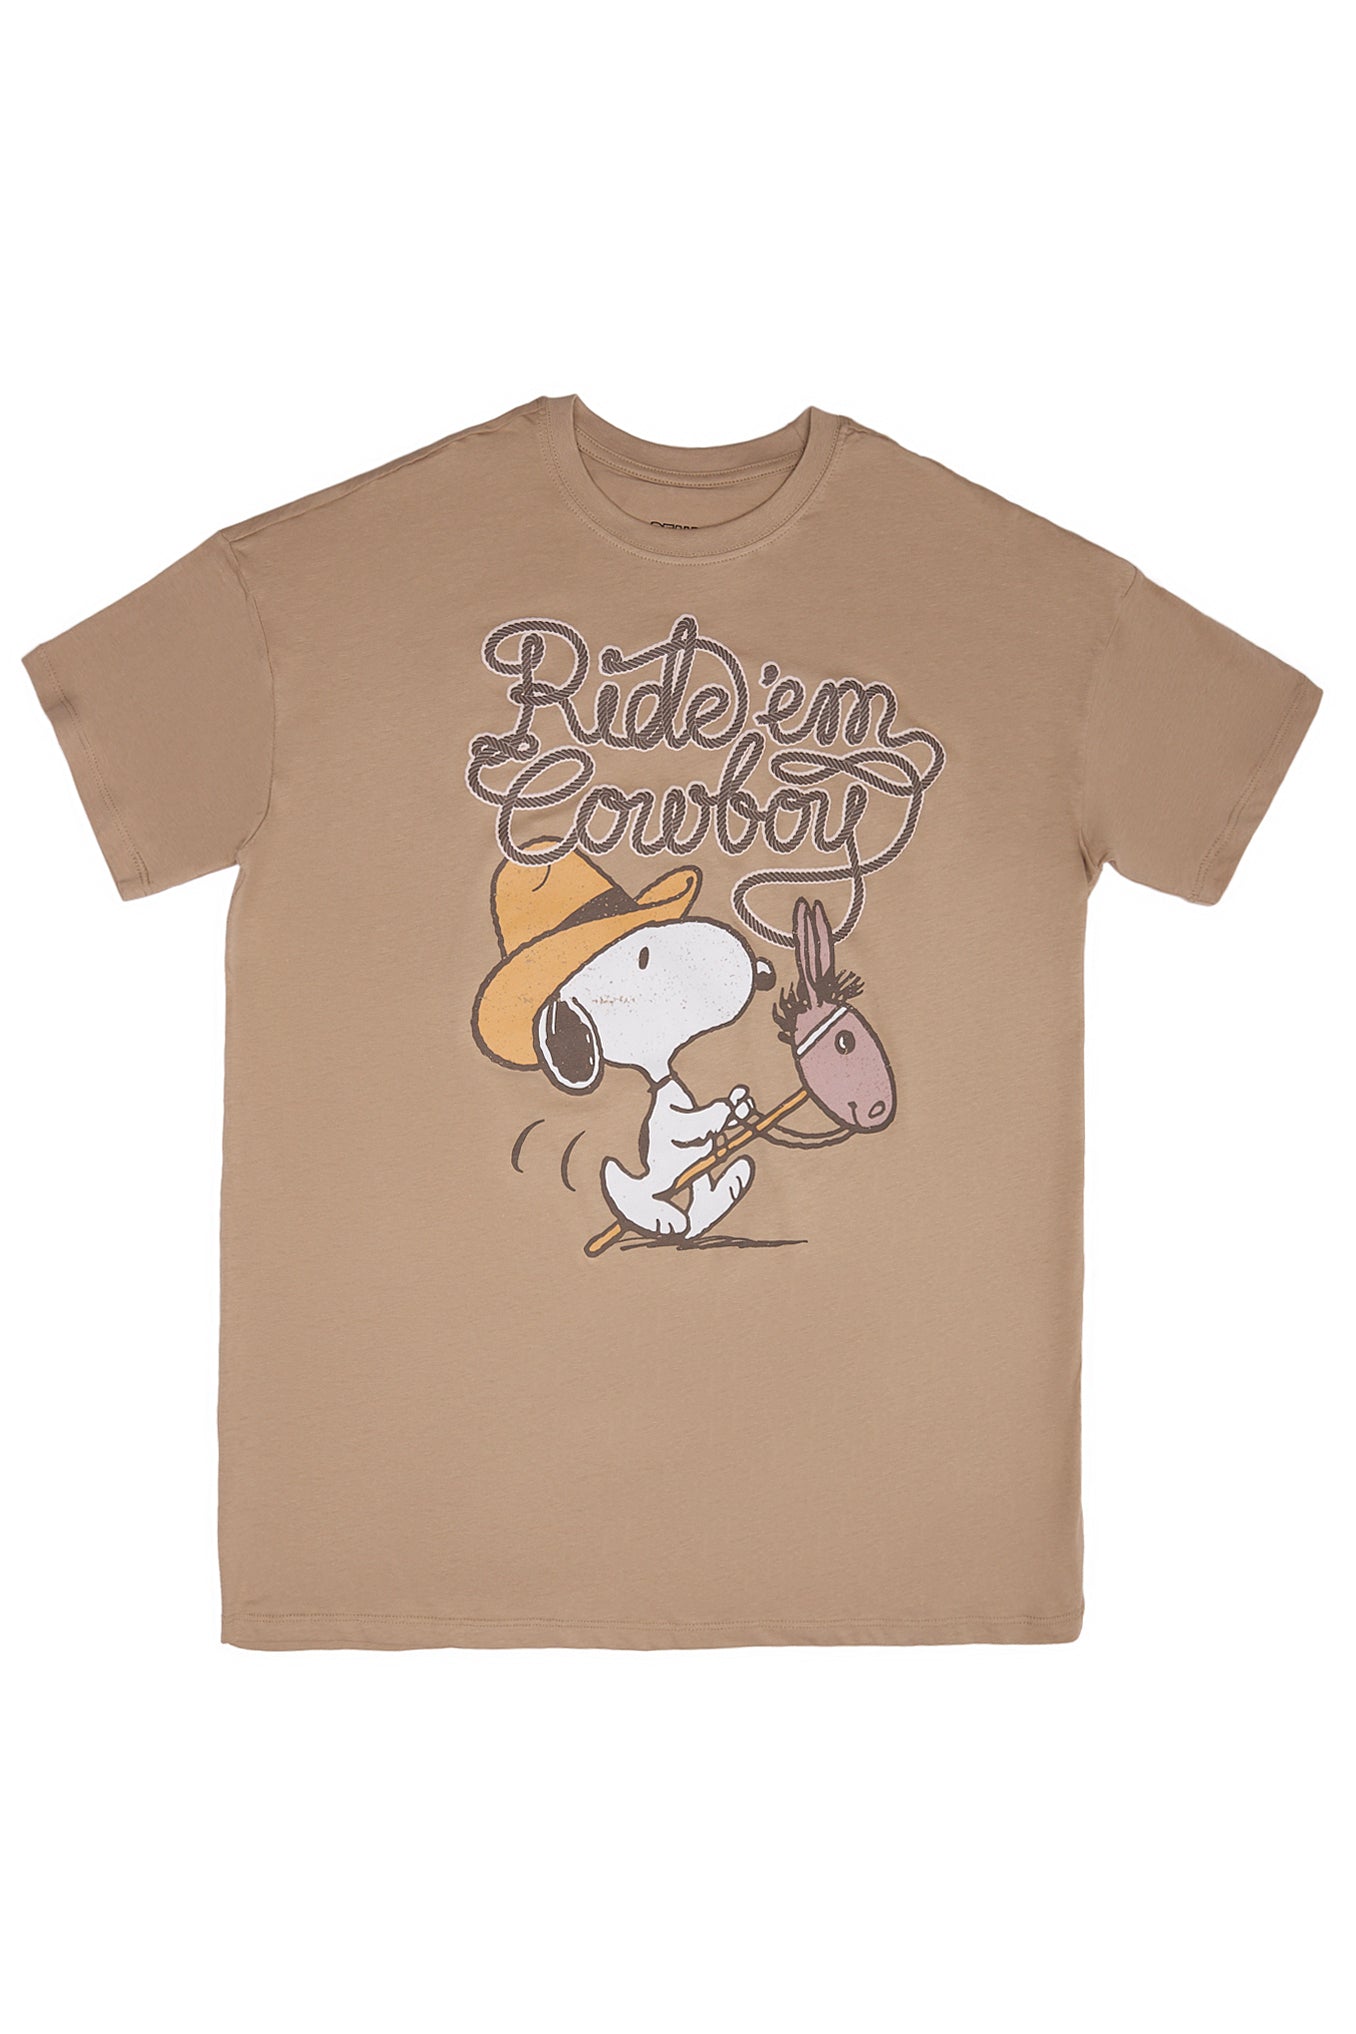 Peanuts Snoopy Cowboy Graphic Relaxed Tee